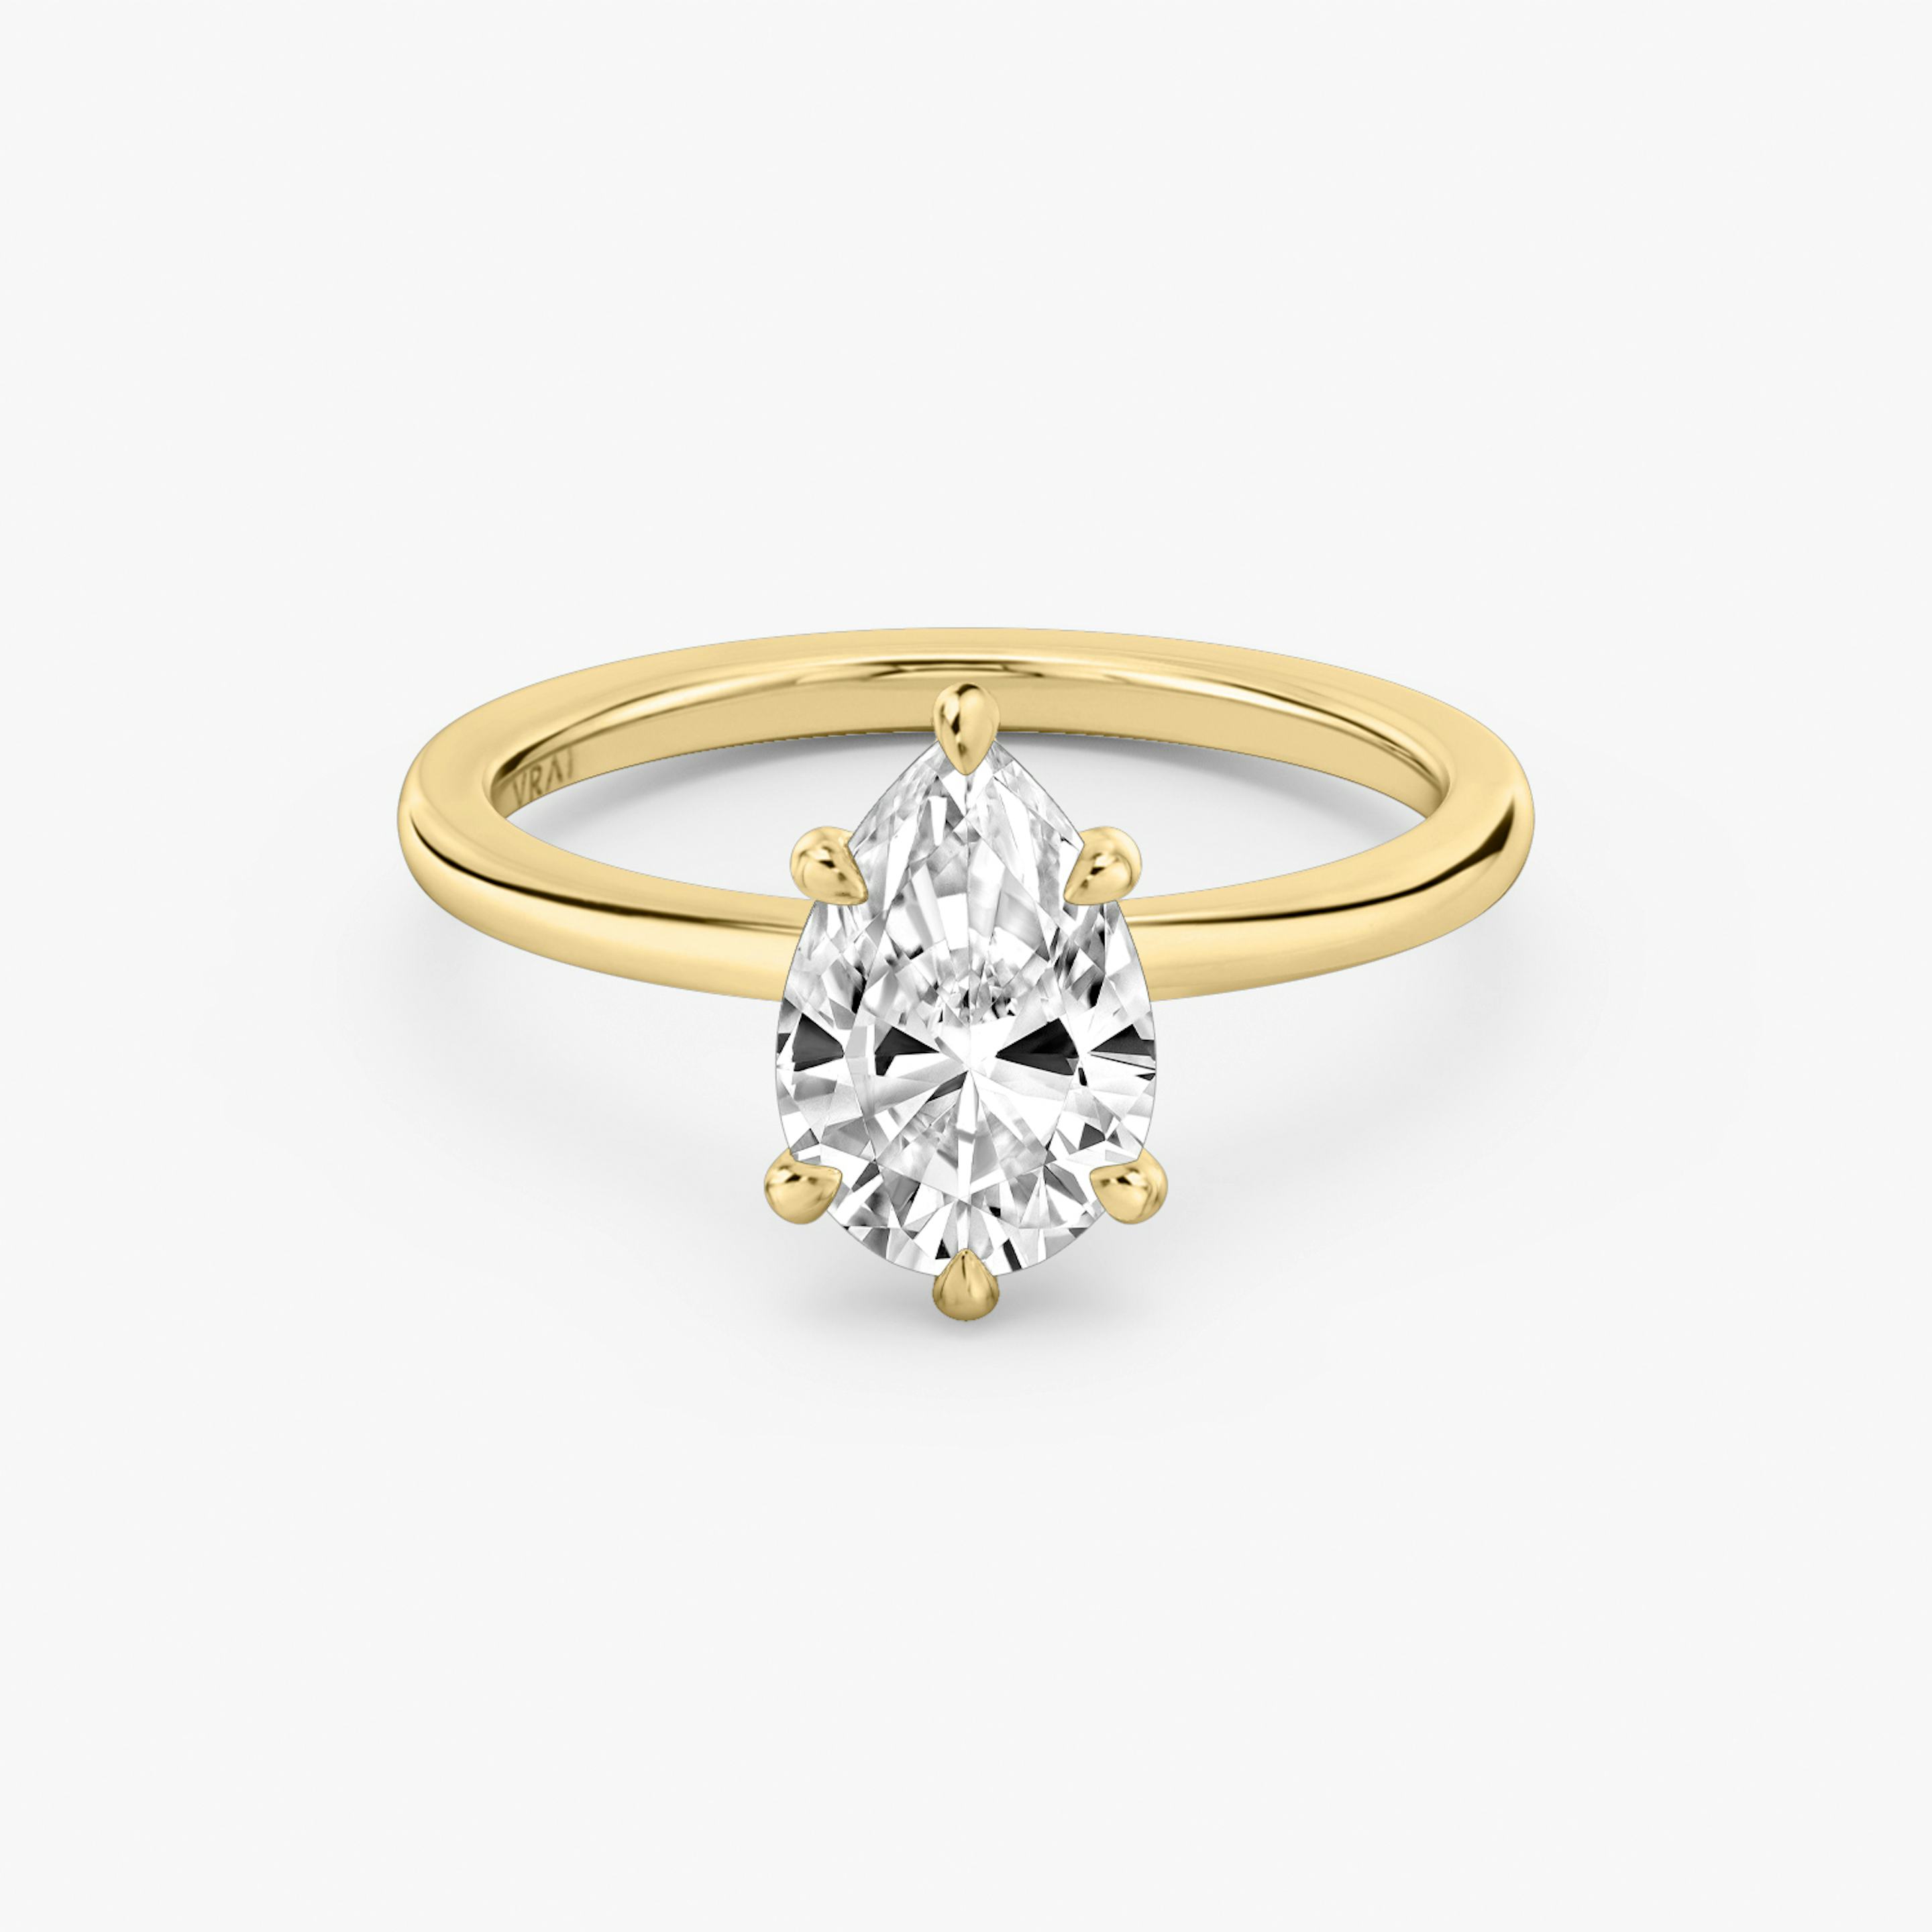 6-Prong Yellow Gold solitaire engagement ring with Pear cut diamond